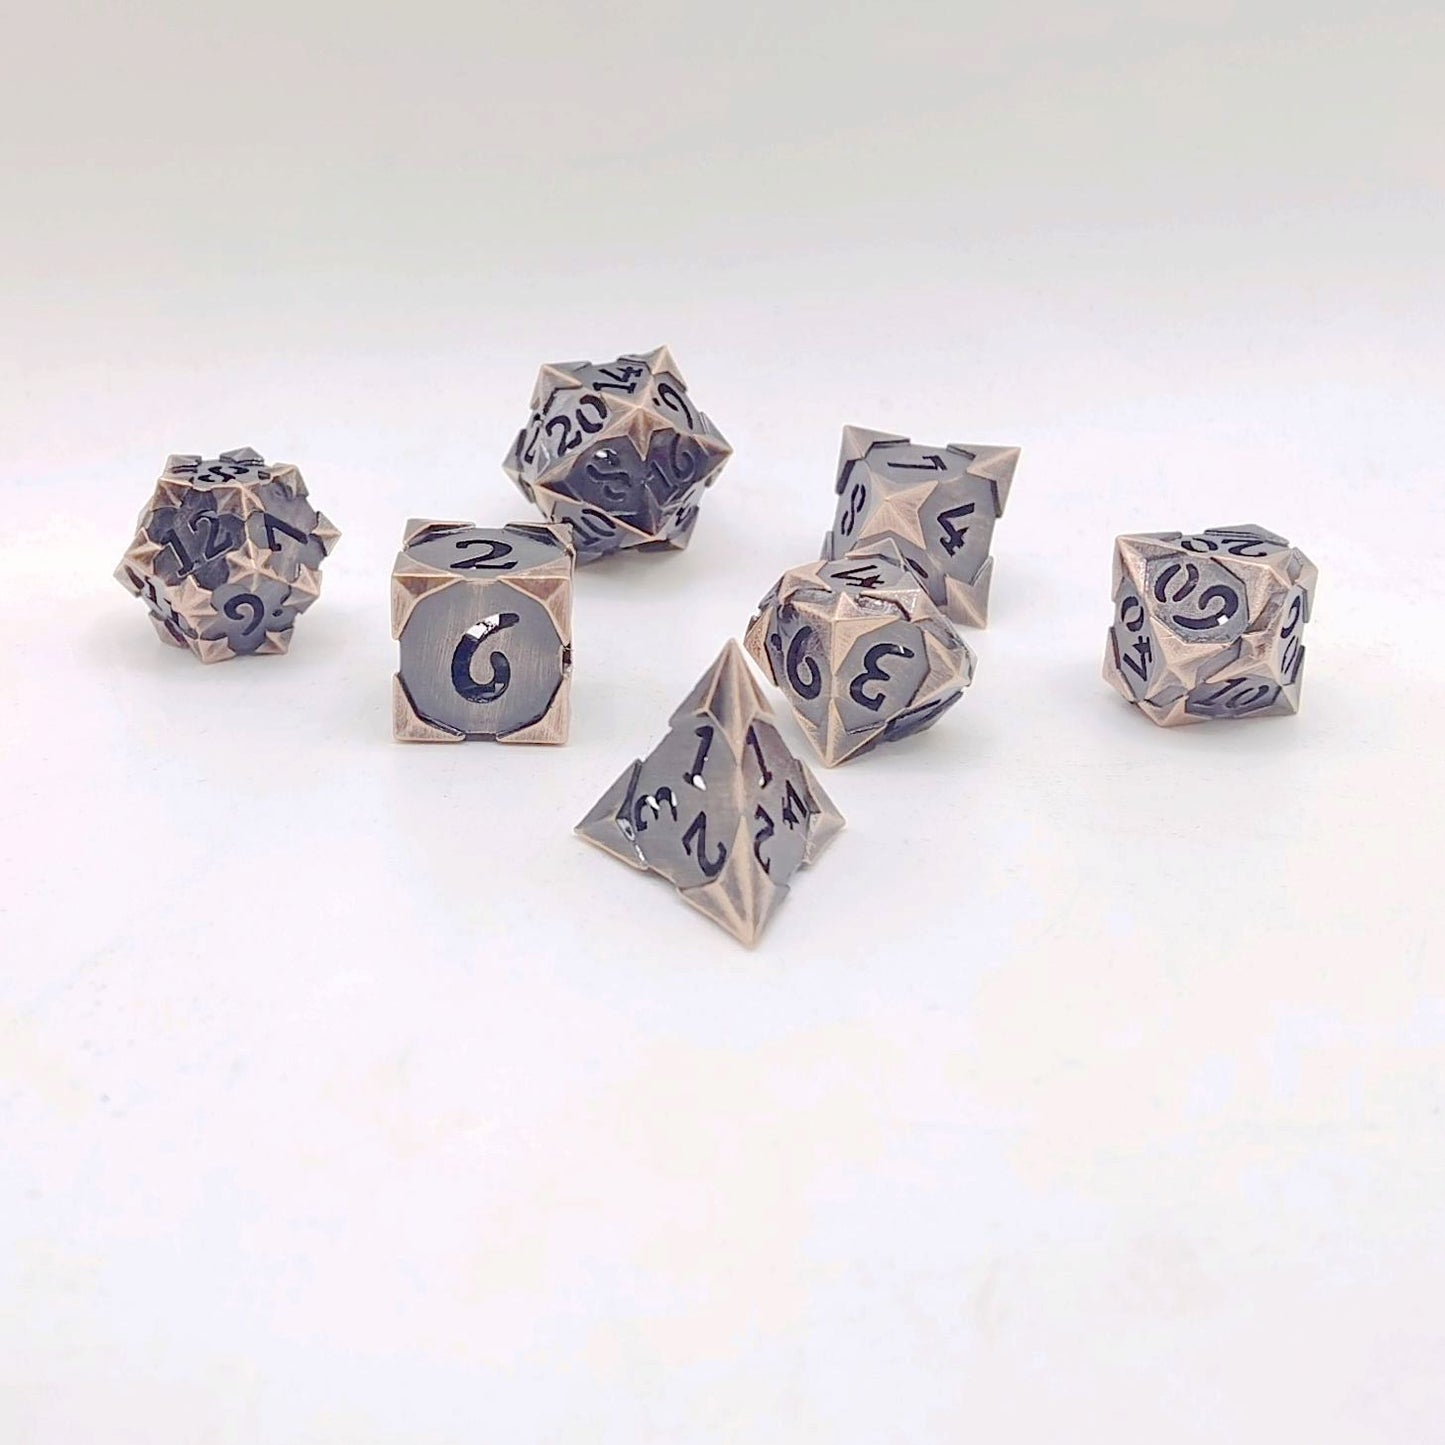 HYMGHO Morning Star Dice hollow cage Ancient Copper